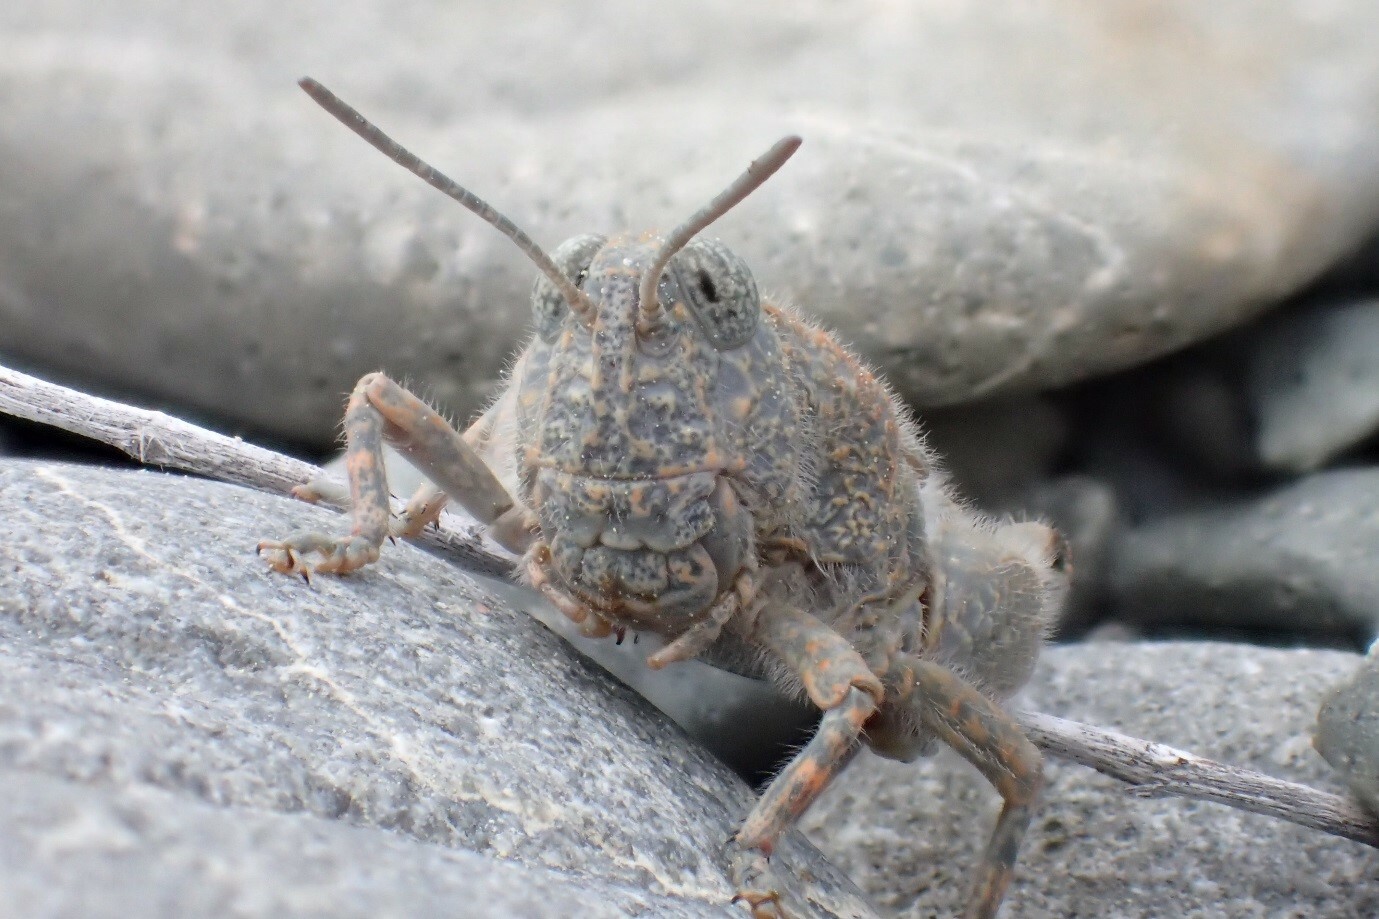 Close up head shot of a Brachaspis robustus on a gravel bed. Tara Murray, All Rights Reserved